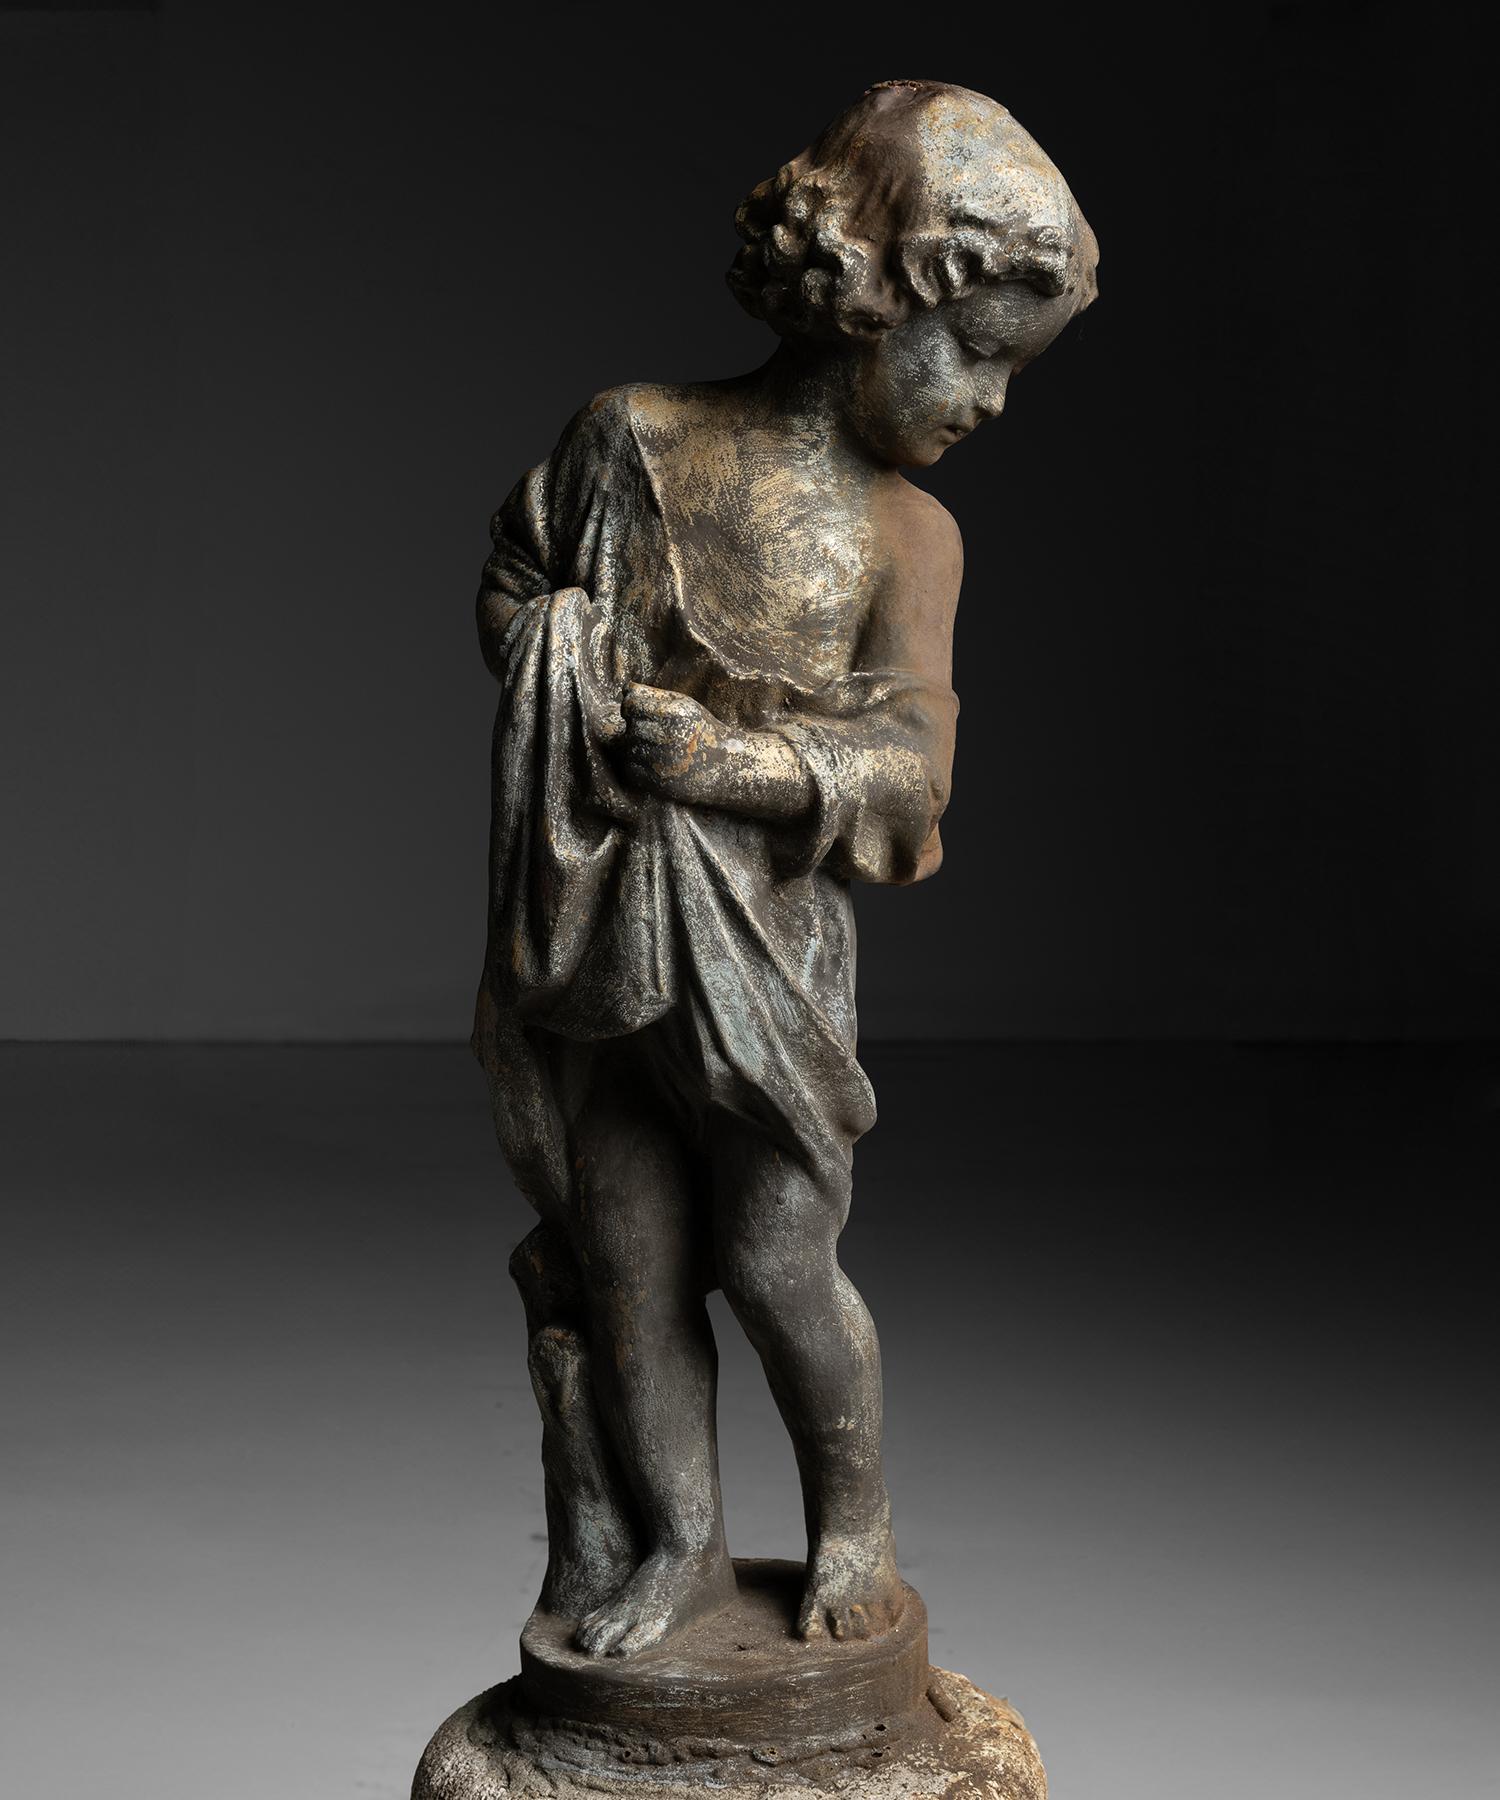 Garden Statue

Belgium circa 1900

Cast iron statue of a boy with draping cloth, on composite stone base.

17.25”w x 17.25”d x 44”h